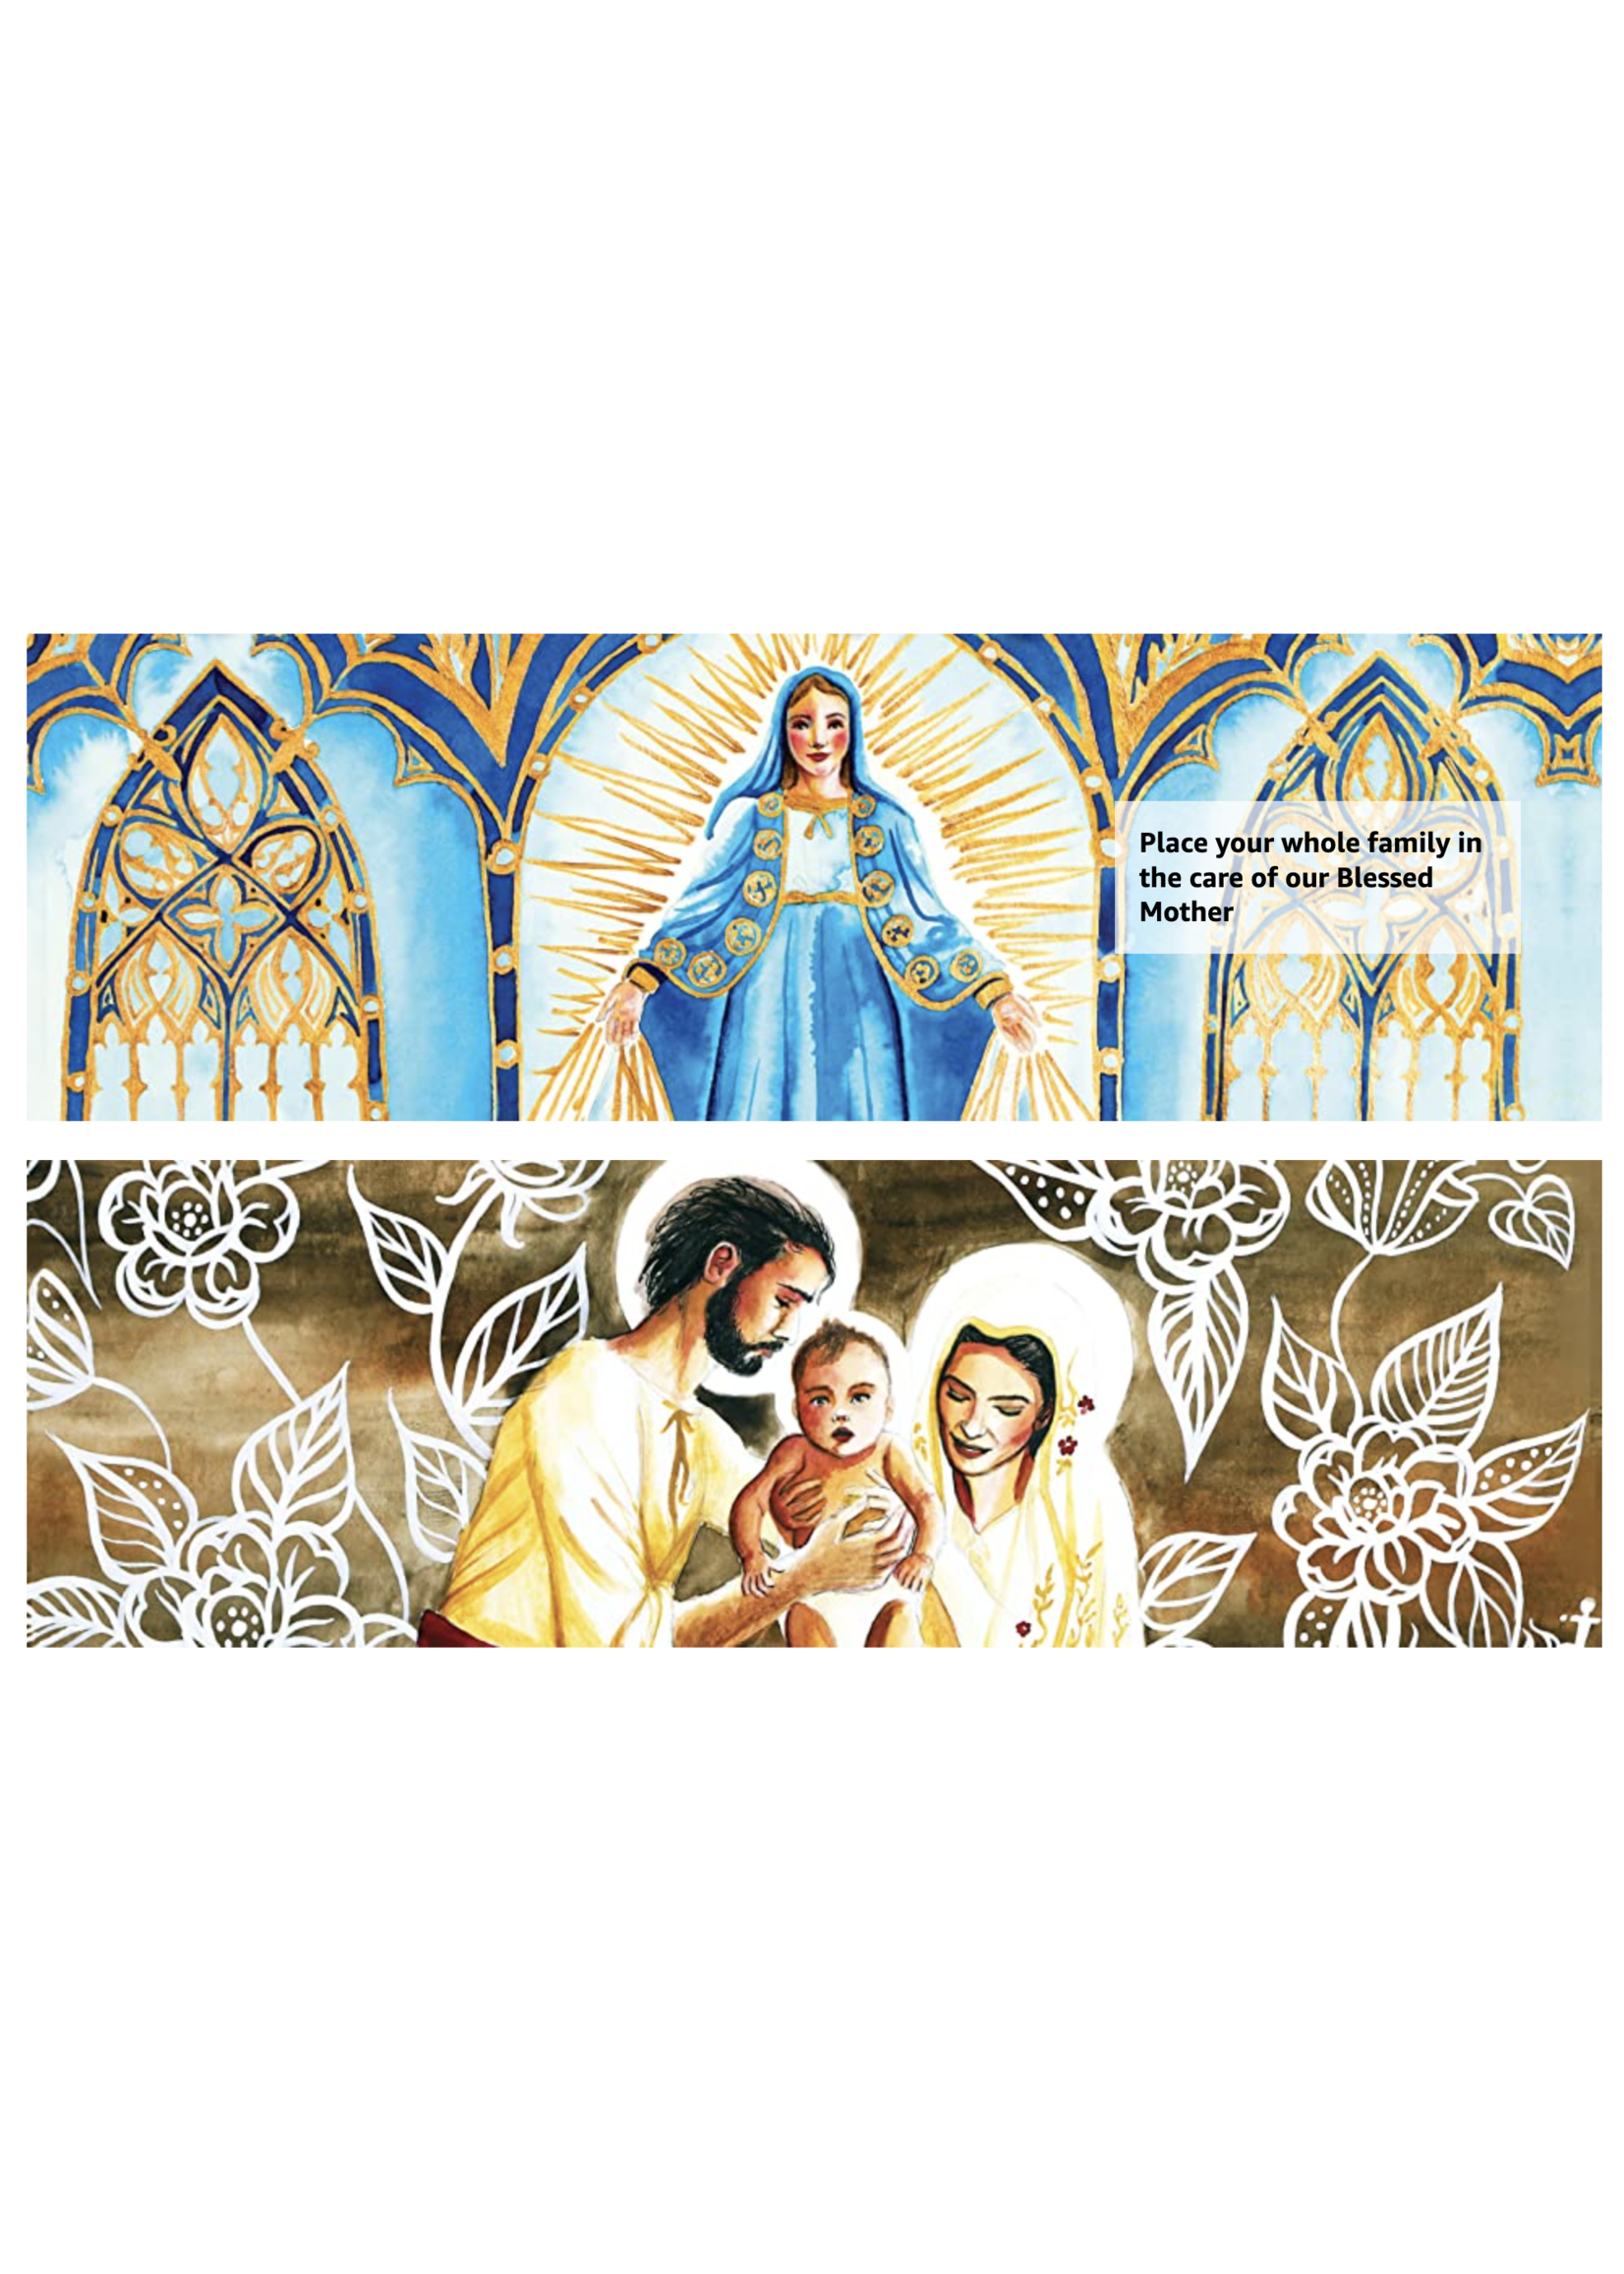 Marian Consecration for Families with Young Children